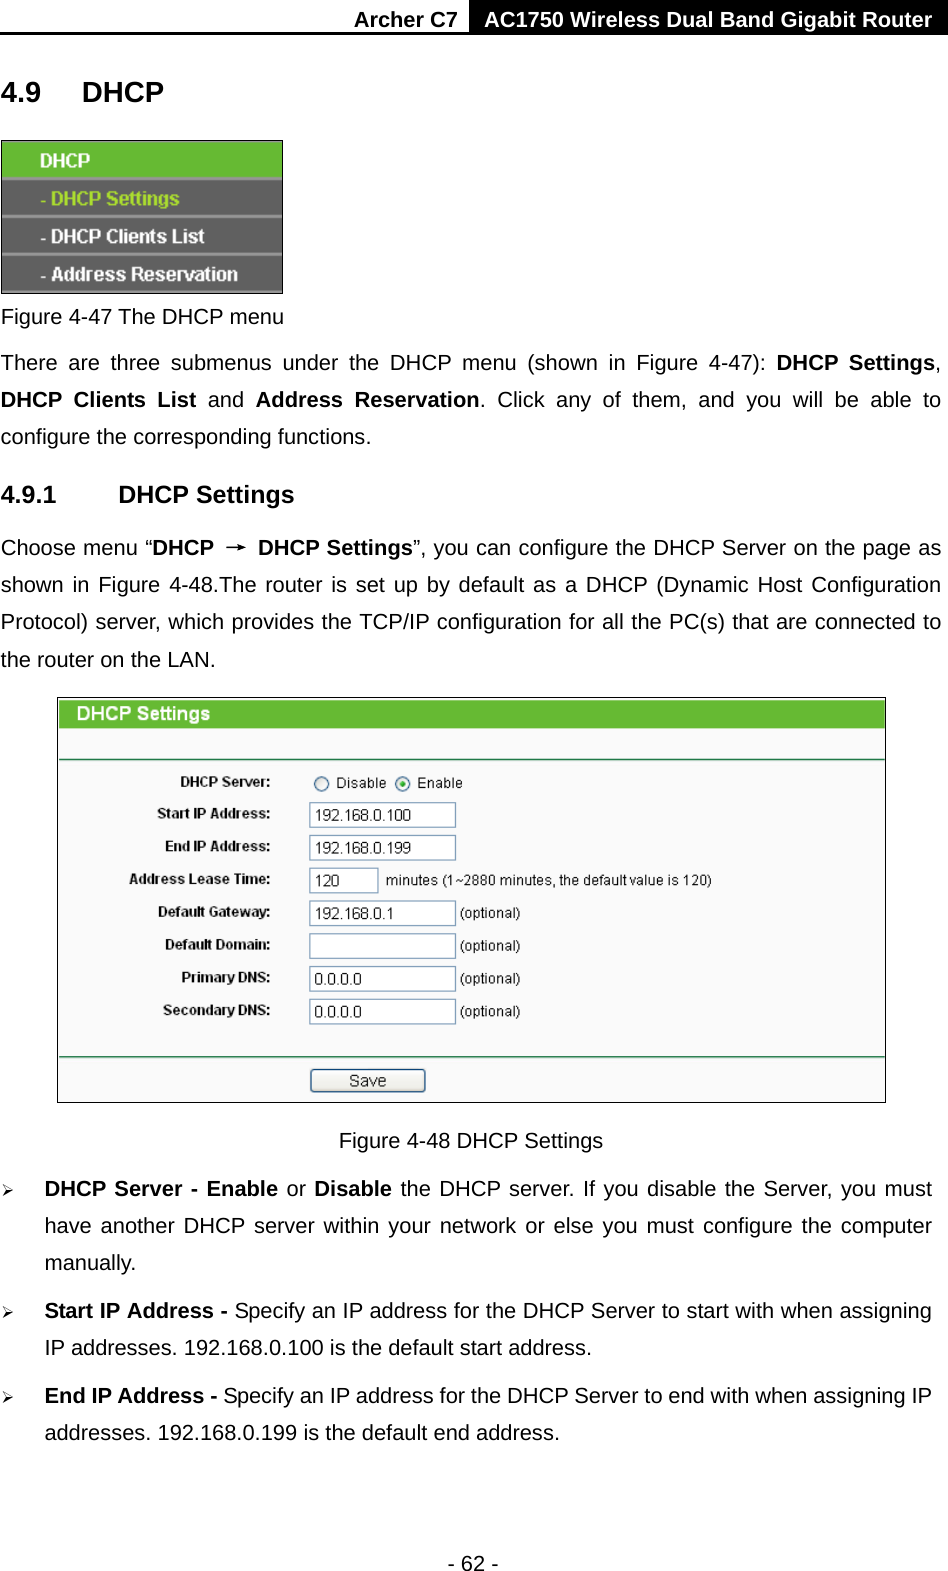 Archer C7 AC1750 Wireless Dual Band Gigabit Router  - 62 - 4.9 DHCP  Figure 4-47 The DHCP menu There are three submenus under the DHCP menu (shown in Figure  4-47):  DHCP Settings, DHCP Clients List and  Address Reservation. Click any of them, and you will be able to configure the corresponding functions. 4.9.1 DHCP Settings Choose menu “DHCP → DHCP Settings”, you can configure the DHCP Server on the page as shown in Figure 4-48.The router is set up by default as a DHCP (Dynamic Host Configuration Protocol) server, which provides the TCP/IP configuration for all the PC(s) that are connected to the router on the LAN.    Figure 4-48 DHCP Settings  DHCP Server - Enable or Disable the DHCP server. If you disable the Server, you must have another DHCP server within your network or else you must configure the computer manually.  Start IP Address - Specify an IP address for the DHCP Server to start with when assigning IP addresses. 192.168.0.100 is the default start address.  End IP Address - Specify an IP address for the DHCP Server to end with when assigning IP addresses. 192.168.0.199 is the default end address. 